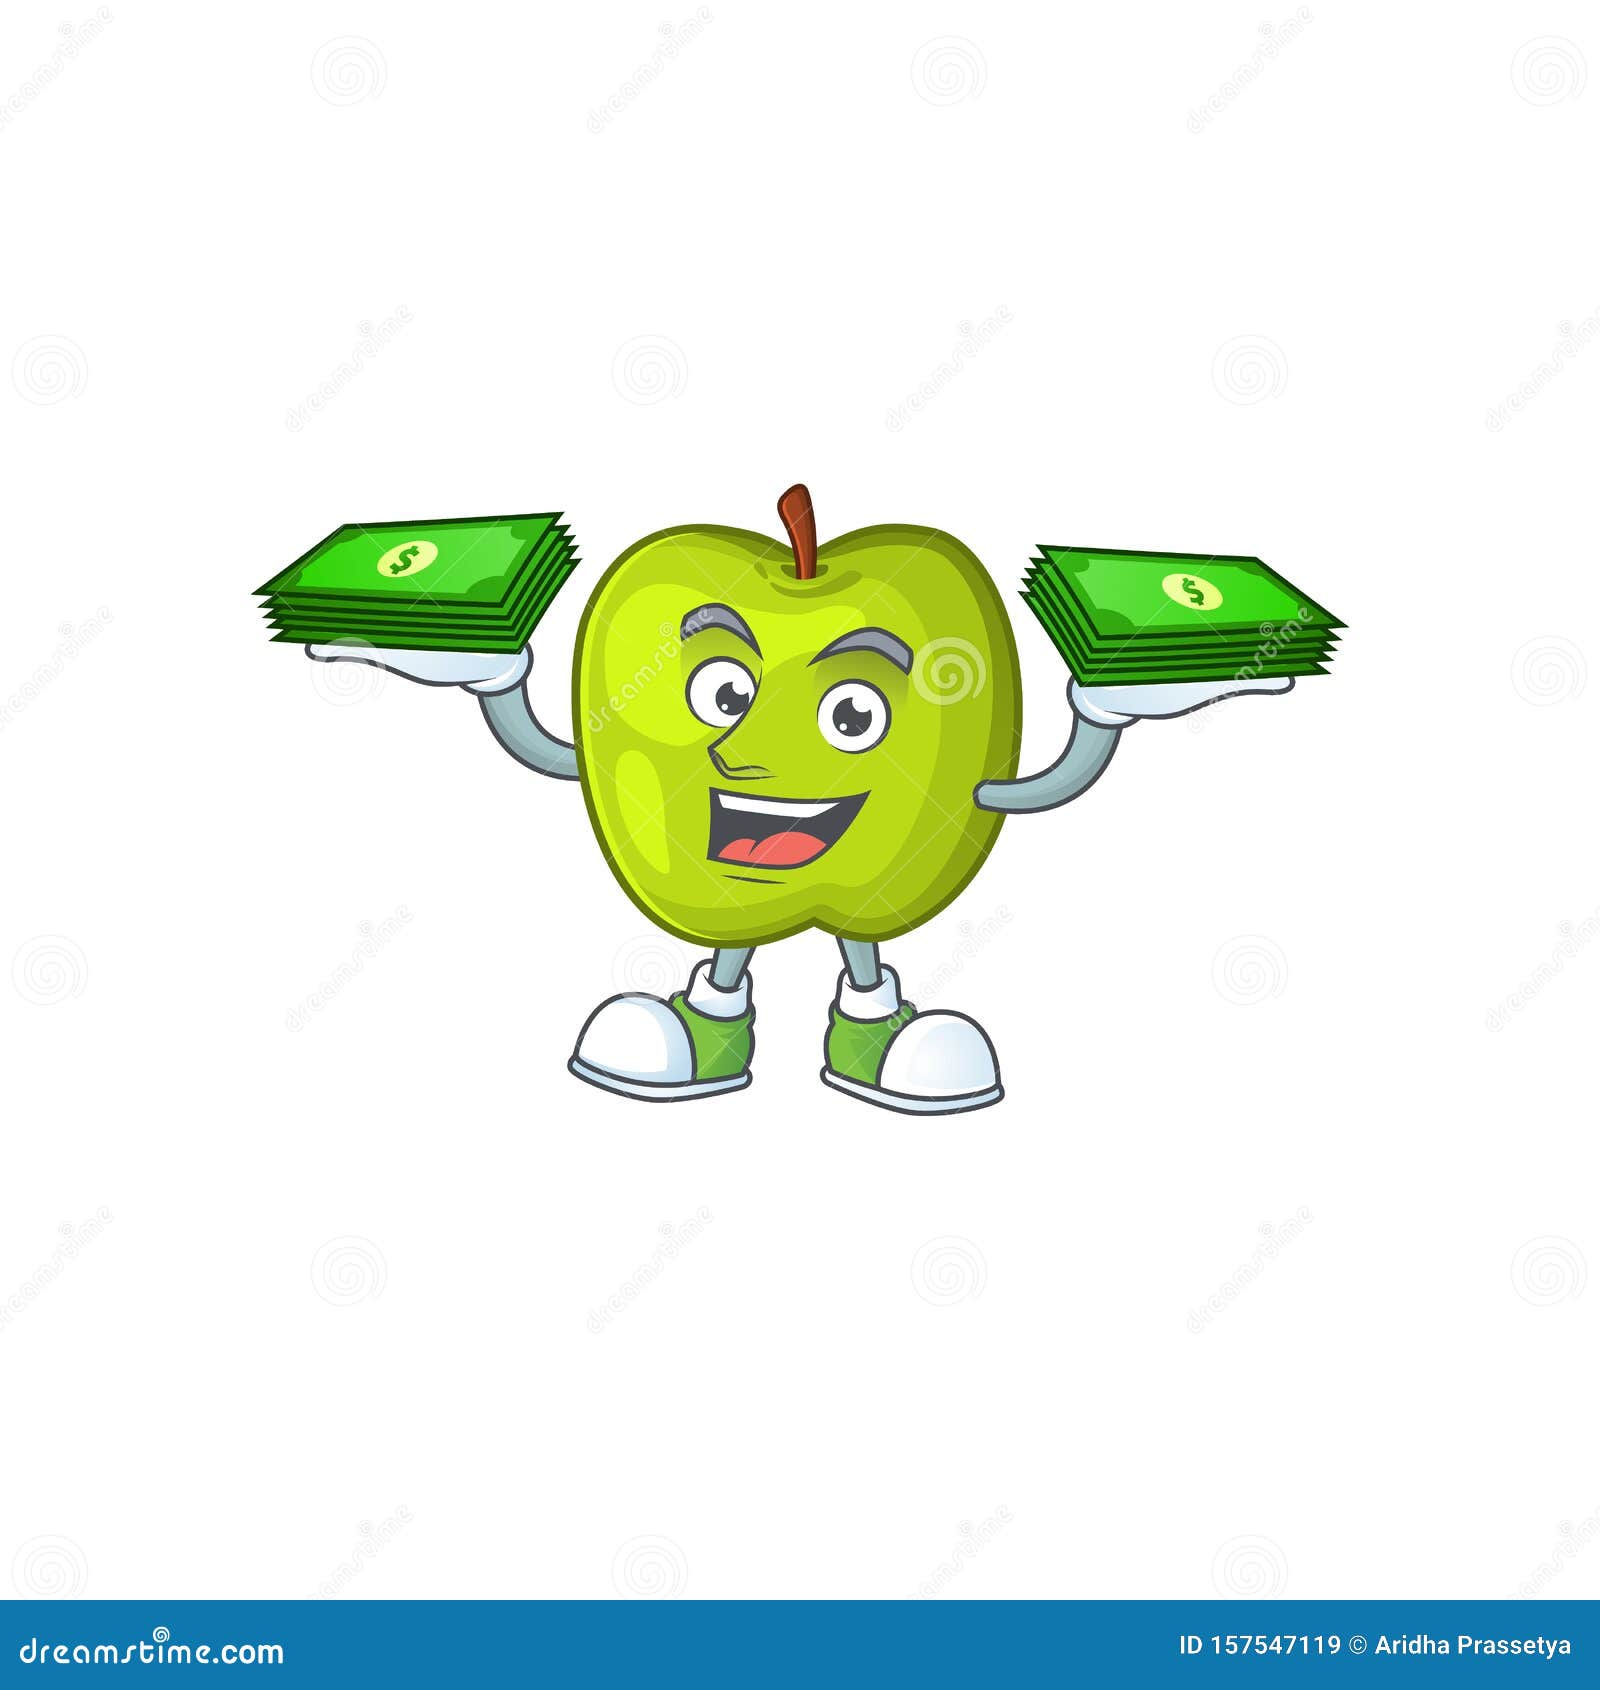 With Money Bag Granny Smith Green Apple Cartoon Mascot Stock Vector -  Illustration of drawing, appetizers: 157547119